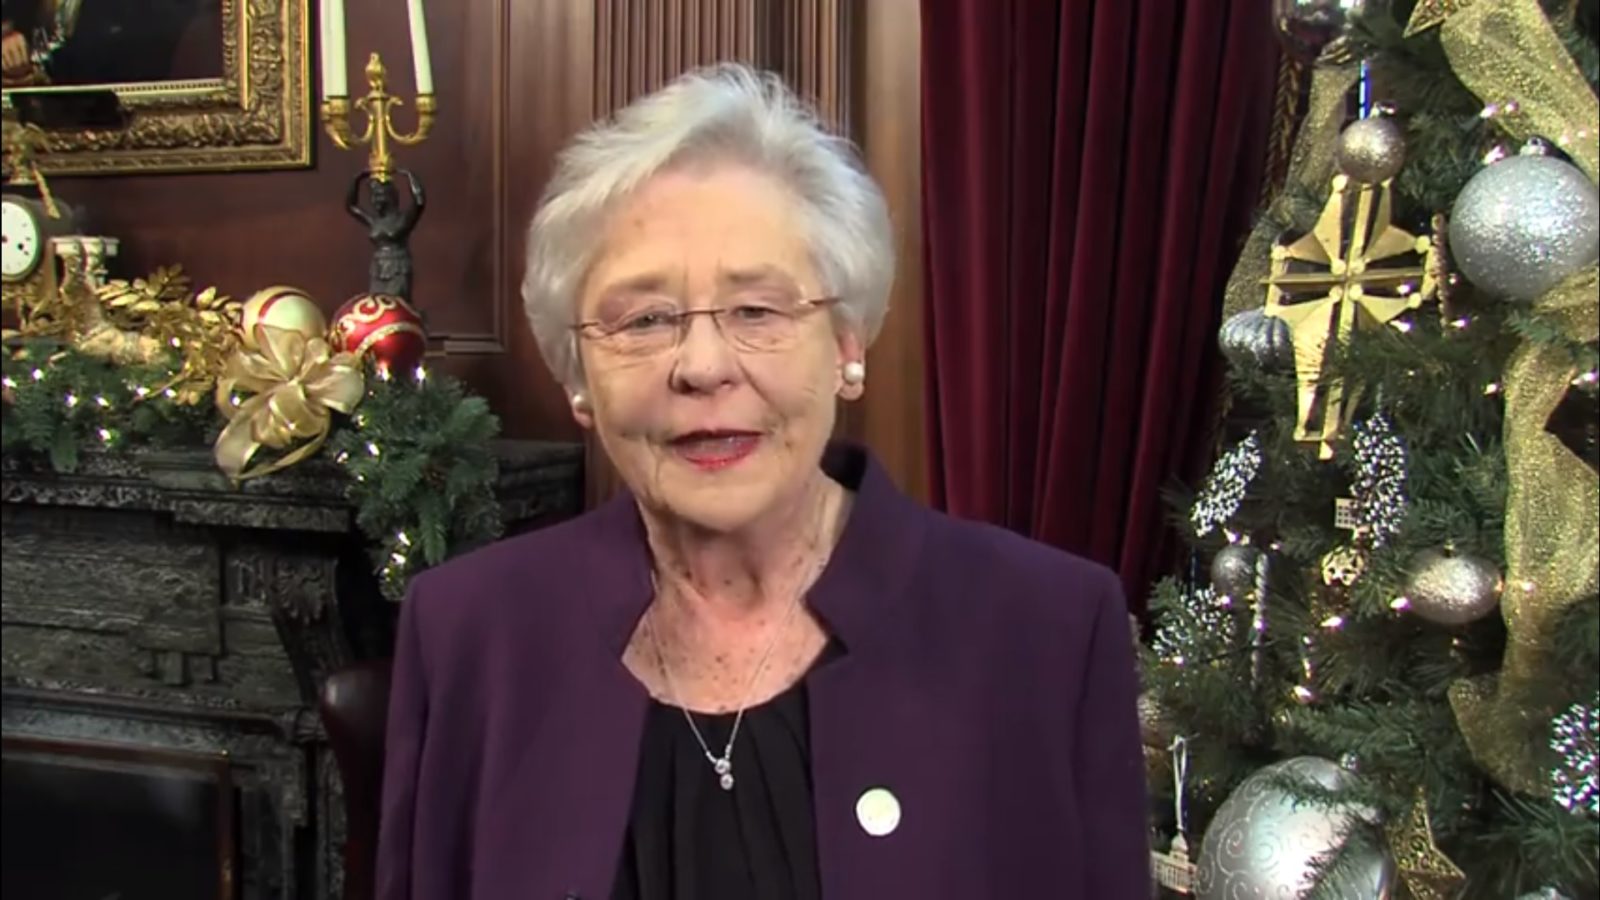 governor-of-alabama-kay-ivey-hits-out-at-disgusting-claims-she-s-a-closeted-lesbian-pinknews